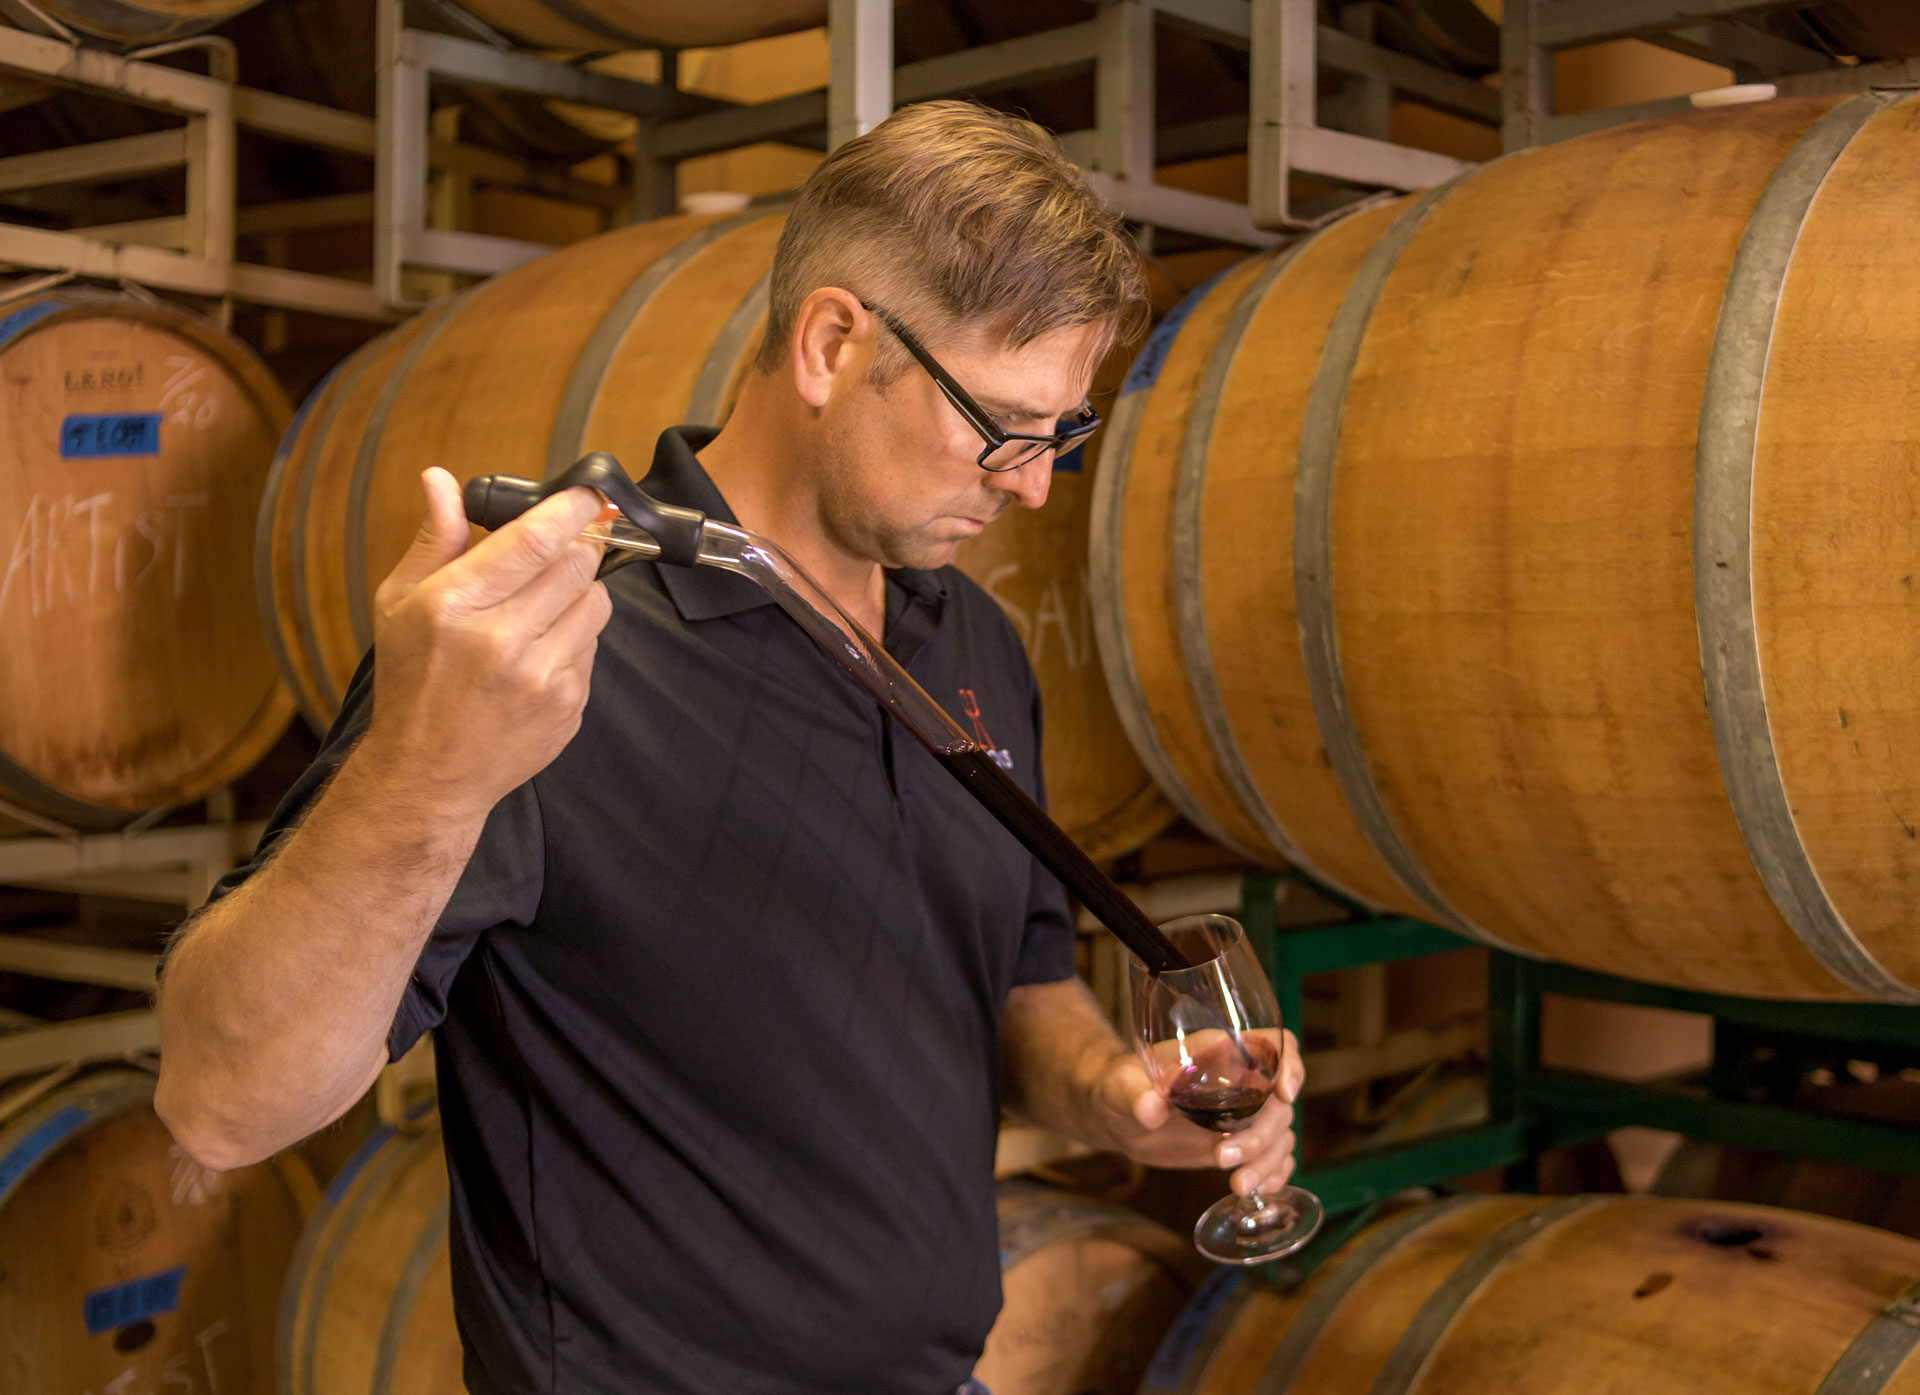 Ned Morris testing wine in front of barrels of wine.